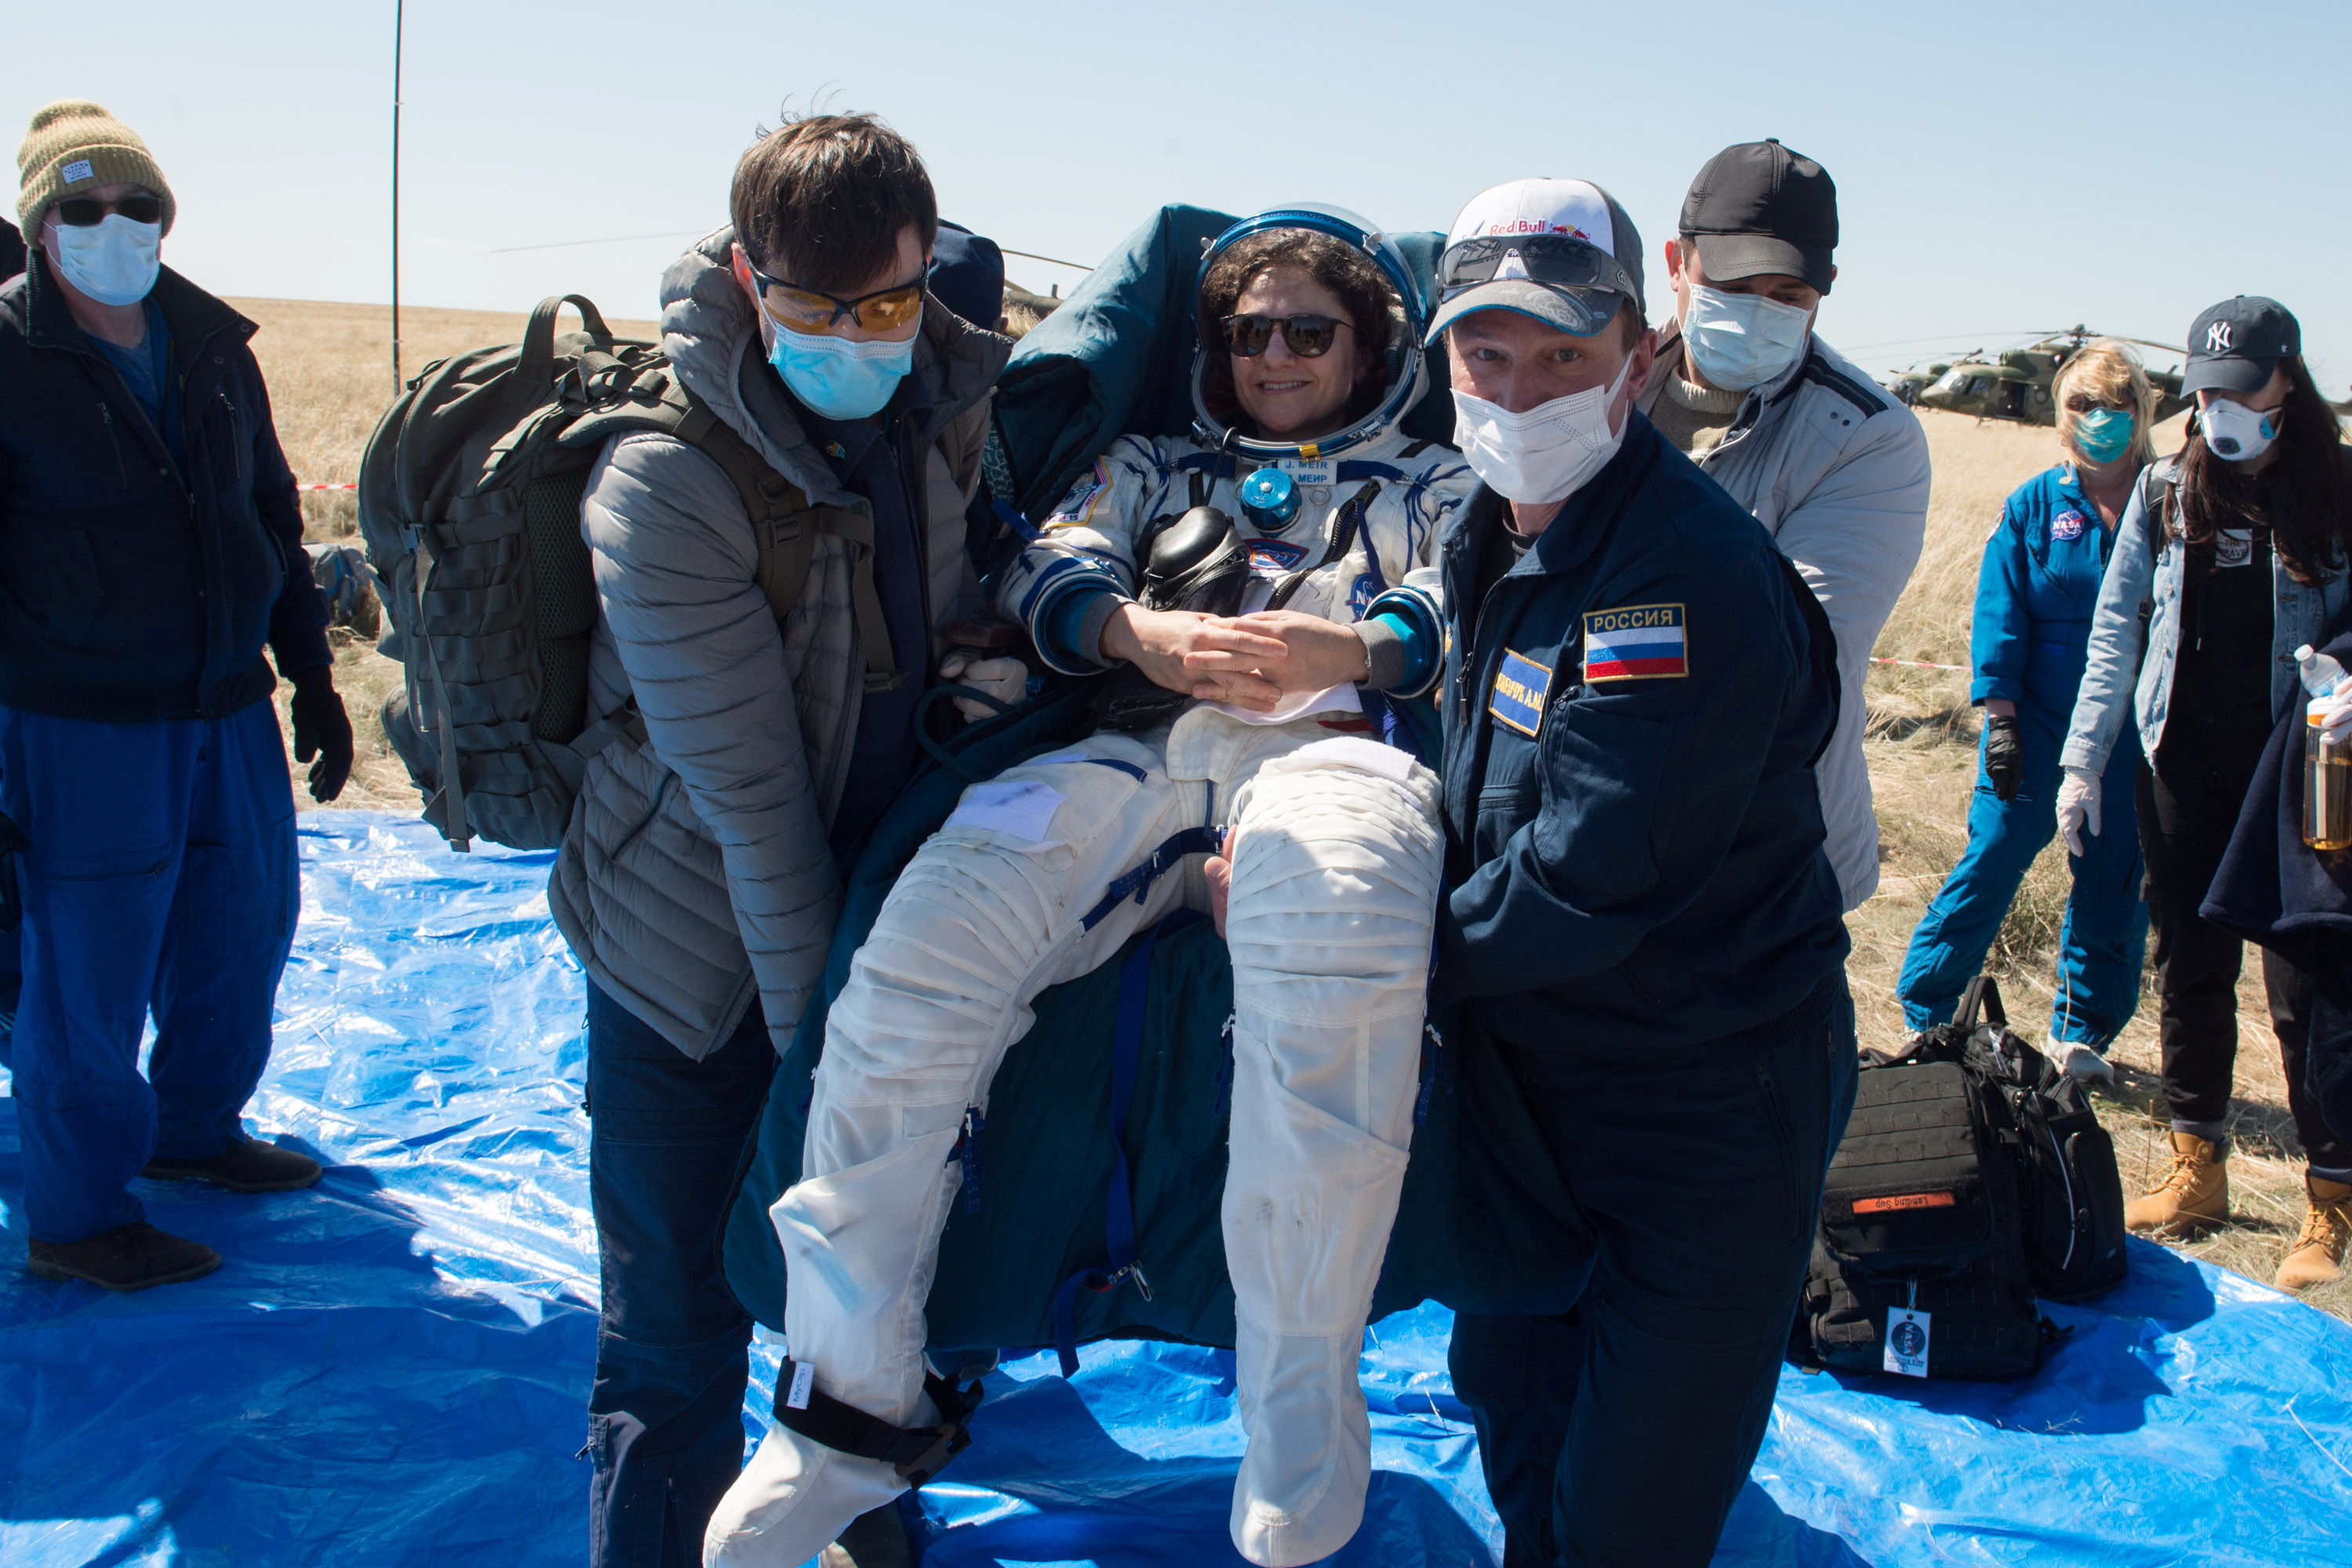 Ground personnel carry International Space Station (ISS) crew member Jessica Meir of NASA after the landing of the Soyuz MS-15 space capsule in a remote area outside of Kazakhstan on April 17, 2020 (REUTERS )